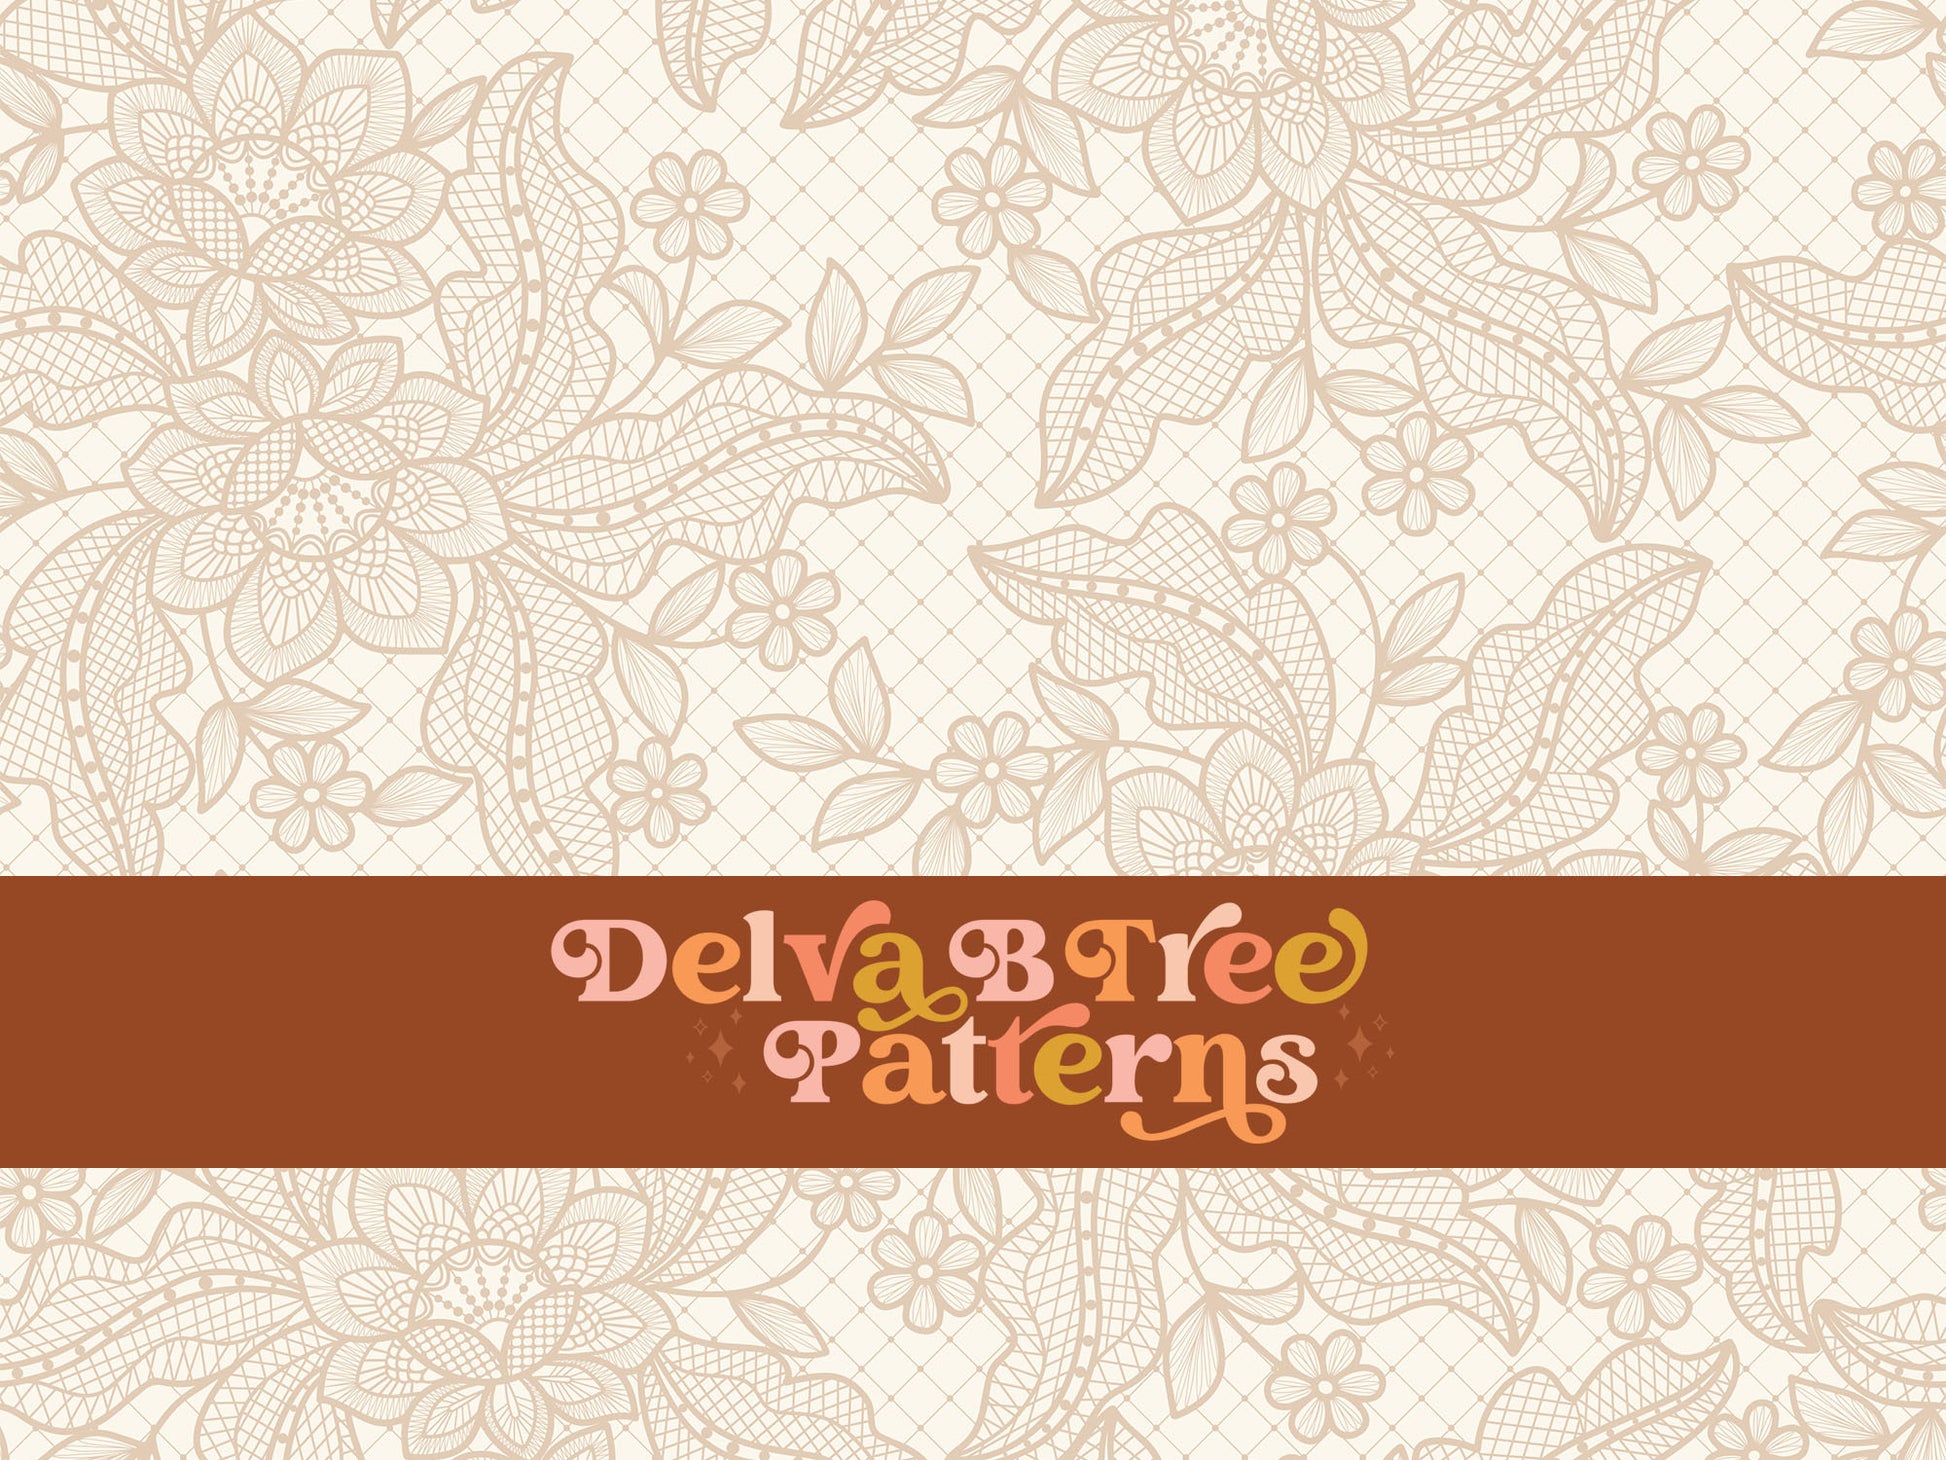 Neutral Tan flowers, leaves and faux lace netting on an off white / ivory / cream background seamless file for fabric printing. Dainty, delicate, feminine, romantic Floral Repeat Pattern for textiles, polymailers, baby girl lovey blankets, nursery crib bedding, kids clothing, girls hair accessories, home decor accents, pet products.